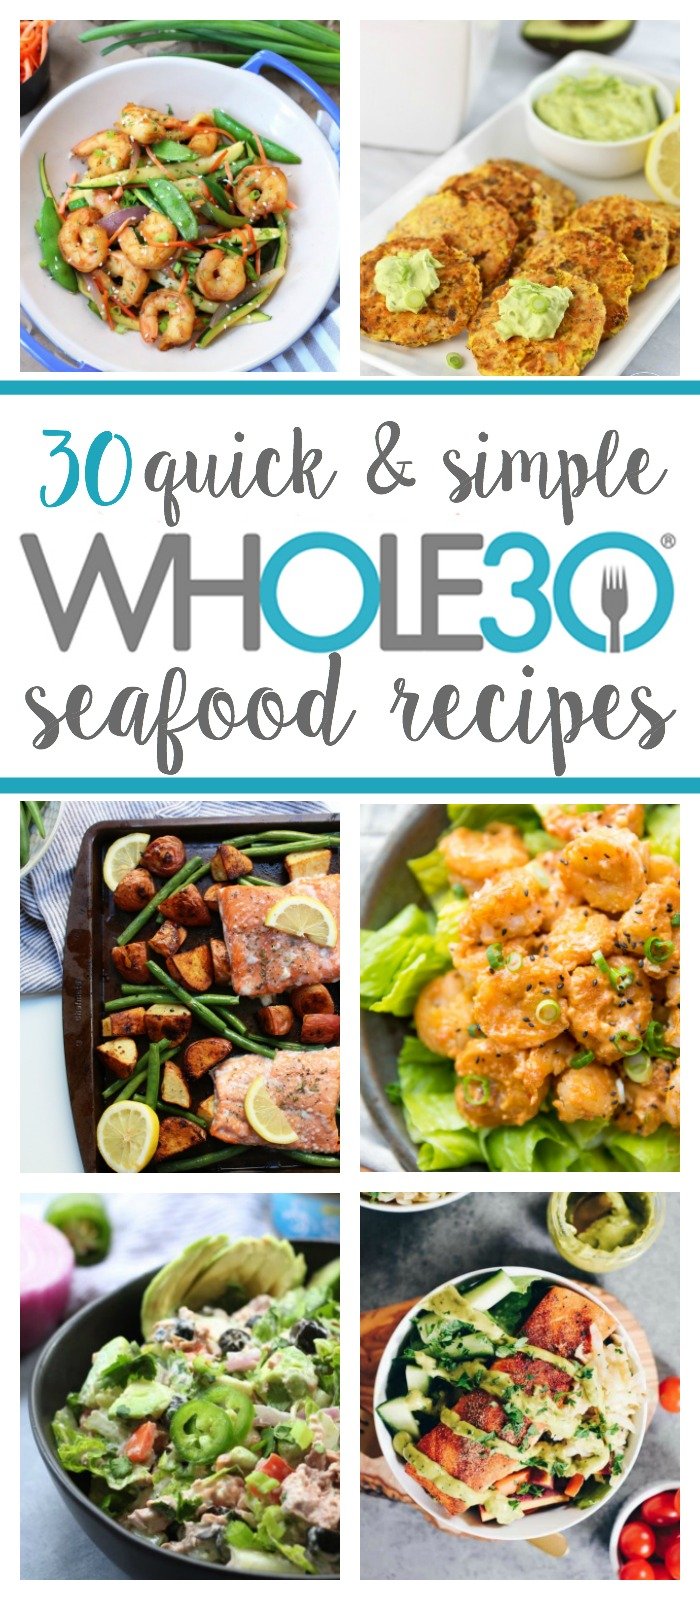 These 30 Whole30 seafood recipes are easy, family friendly Paleo fish recipes that will help you switch up your regular weeknight routine. If you're stuck in a boring chicken rut, this is for you! From Whole30 salmon recipes, shrimp, tuna to mahi-mahi, this list will add some much needed variety to your meal plan! #whole30seafood #paleoseafood #whole30fishrecipes #paleofishrecipes